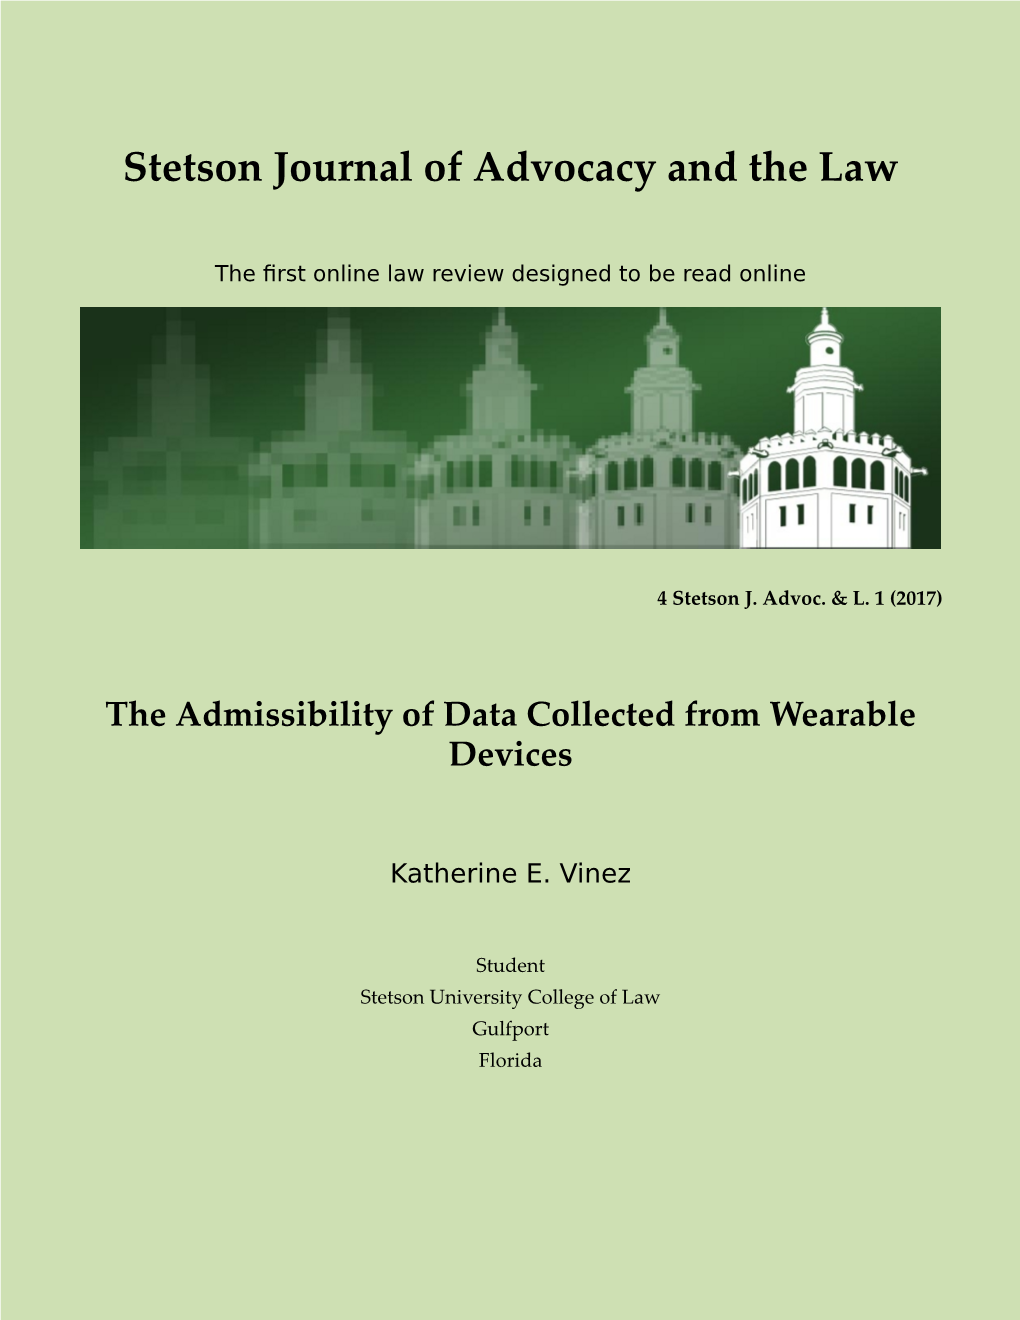 The Admissibility of Data Collected from Wearable Devices in Court